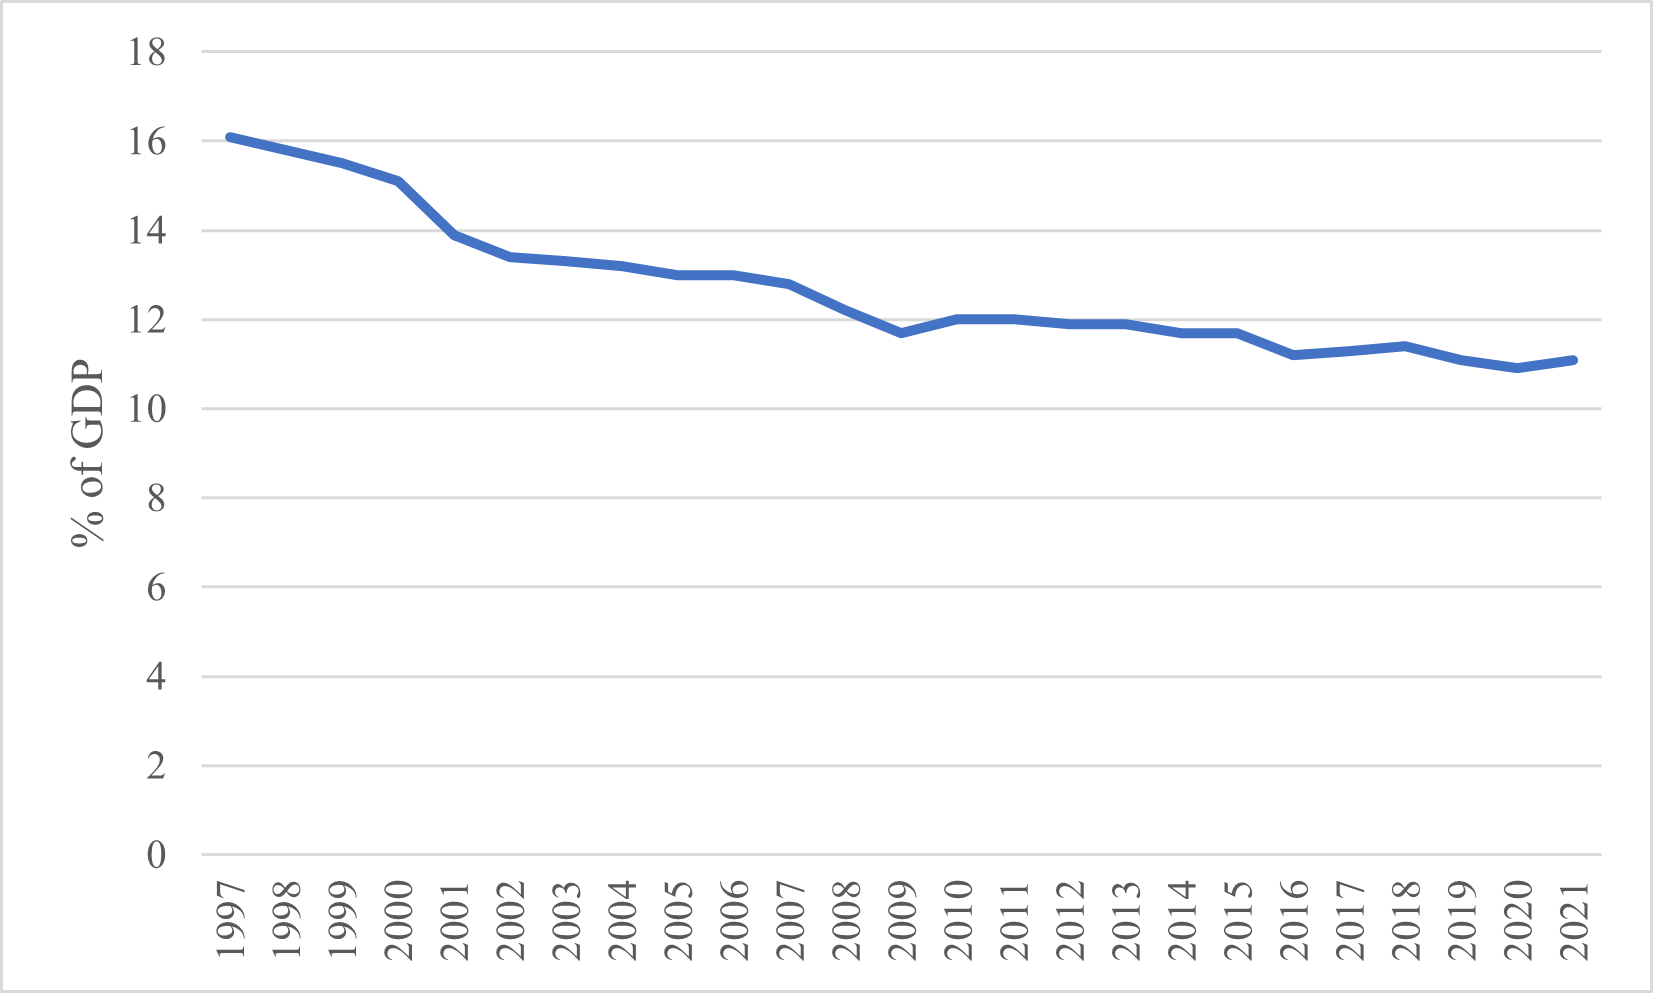 US Manufacturing as a share of GDP (1997 - 2021)